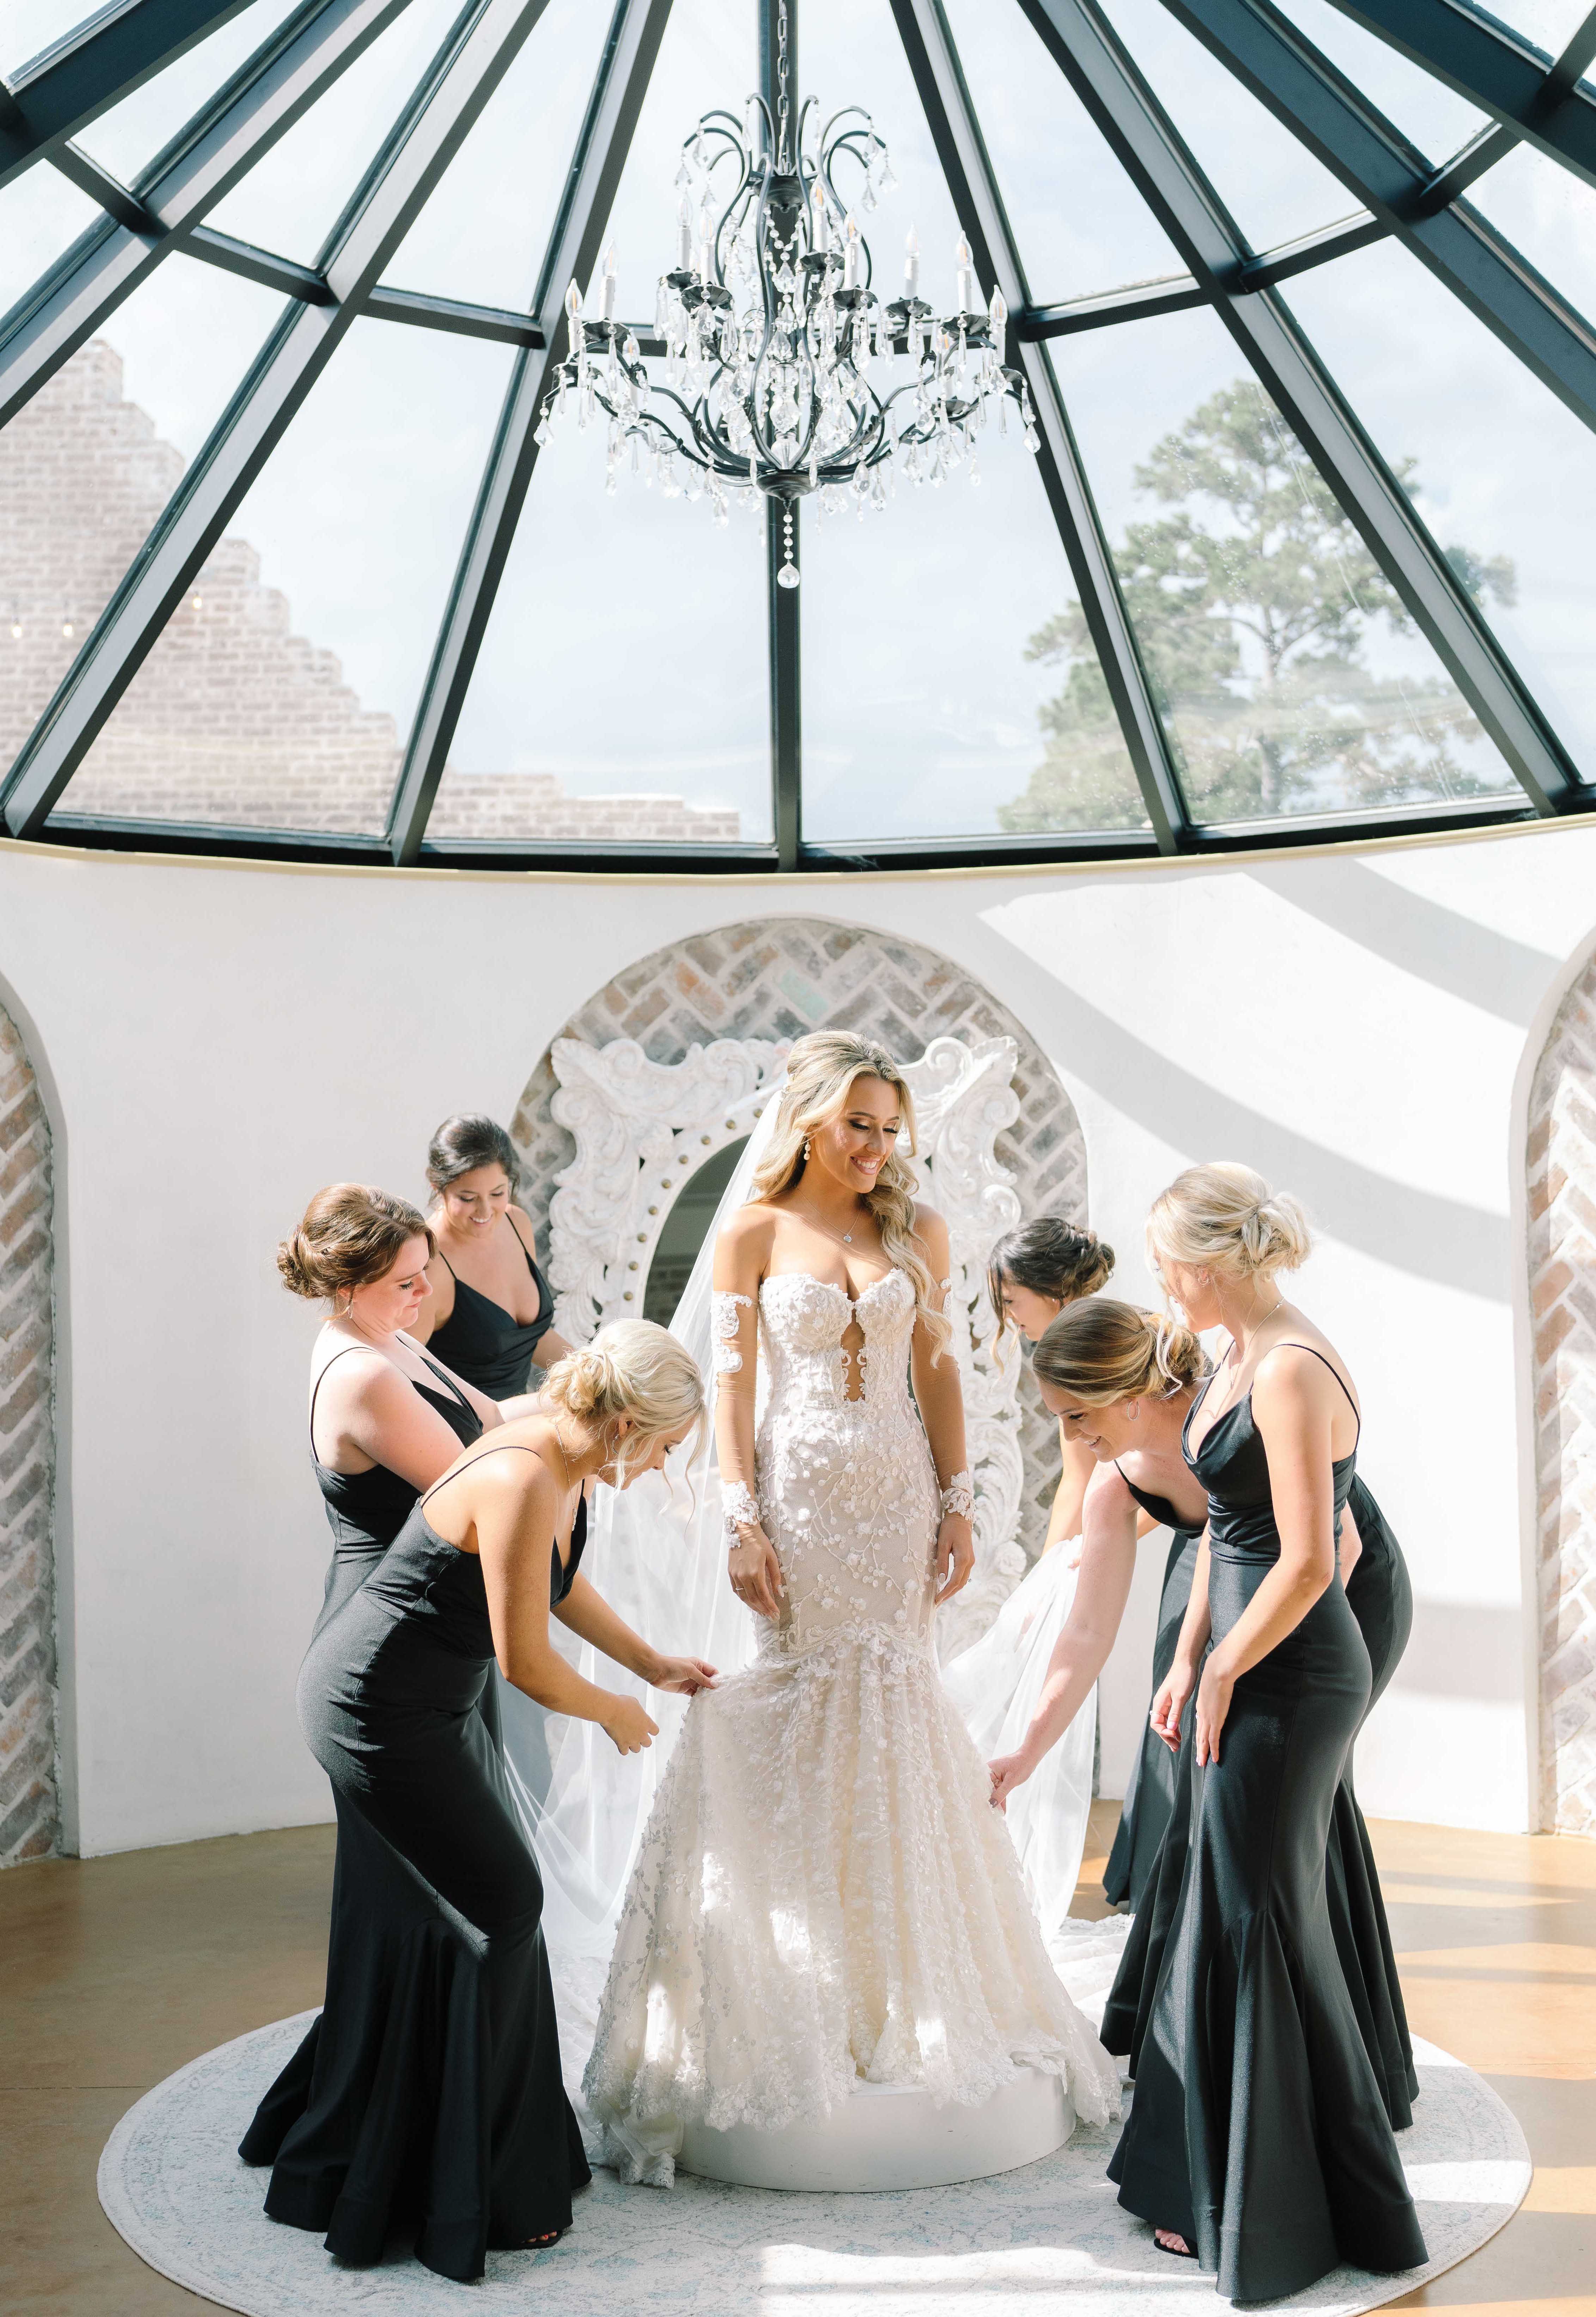 A bride stands in a sunny bridal suite while her bridesmaids fix her wedding gown.